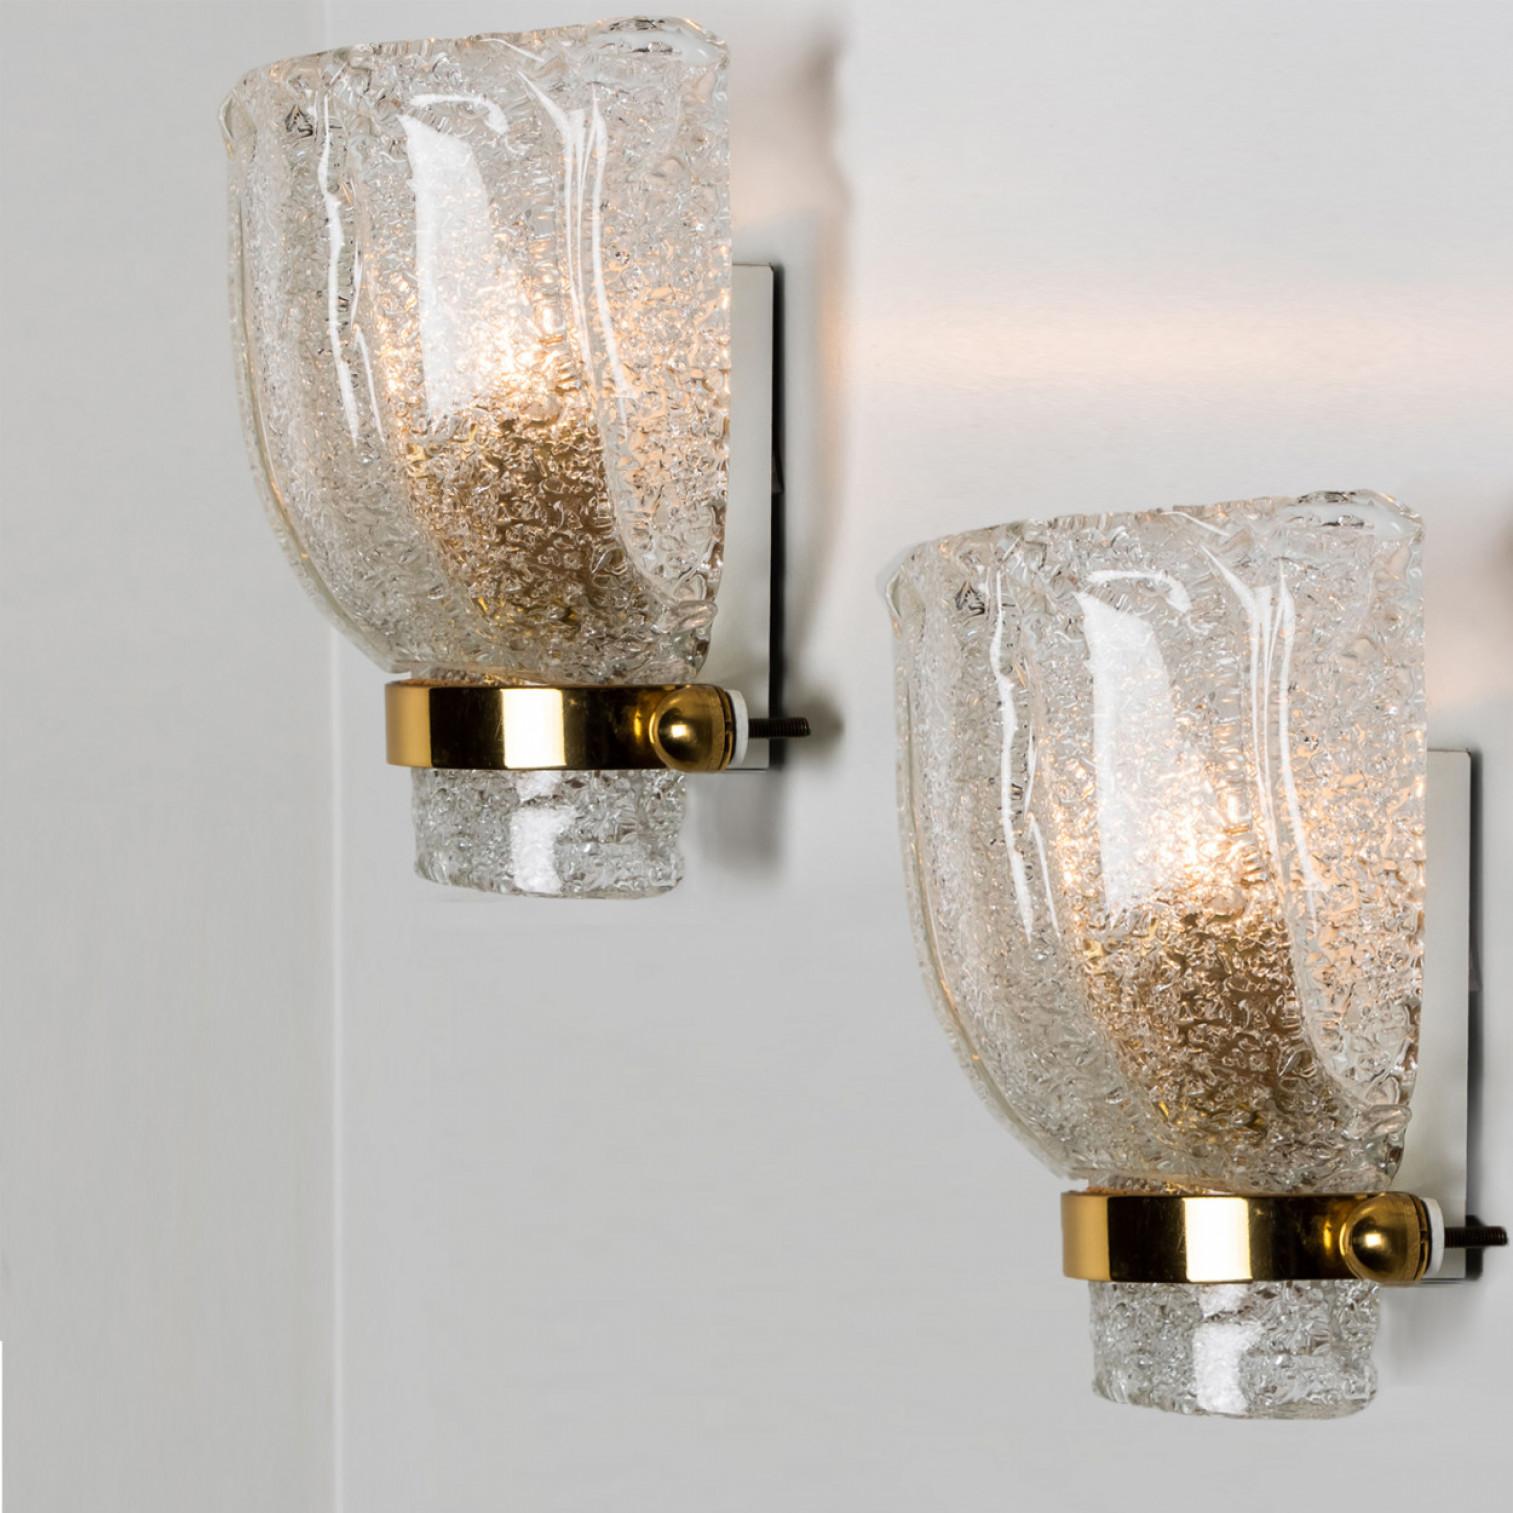 Clean lines to complement all decors. A wonderful high-end Hillebrand wall light fixture with brass detail and thick tulip shaped ice glass. The ice glass refracts the light beautifully, filling a room with a soft, warm glow.

The wall sconce has a